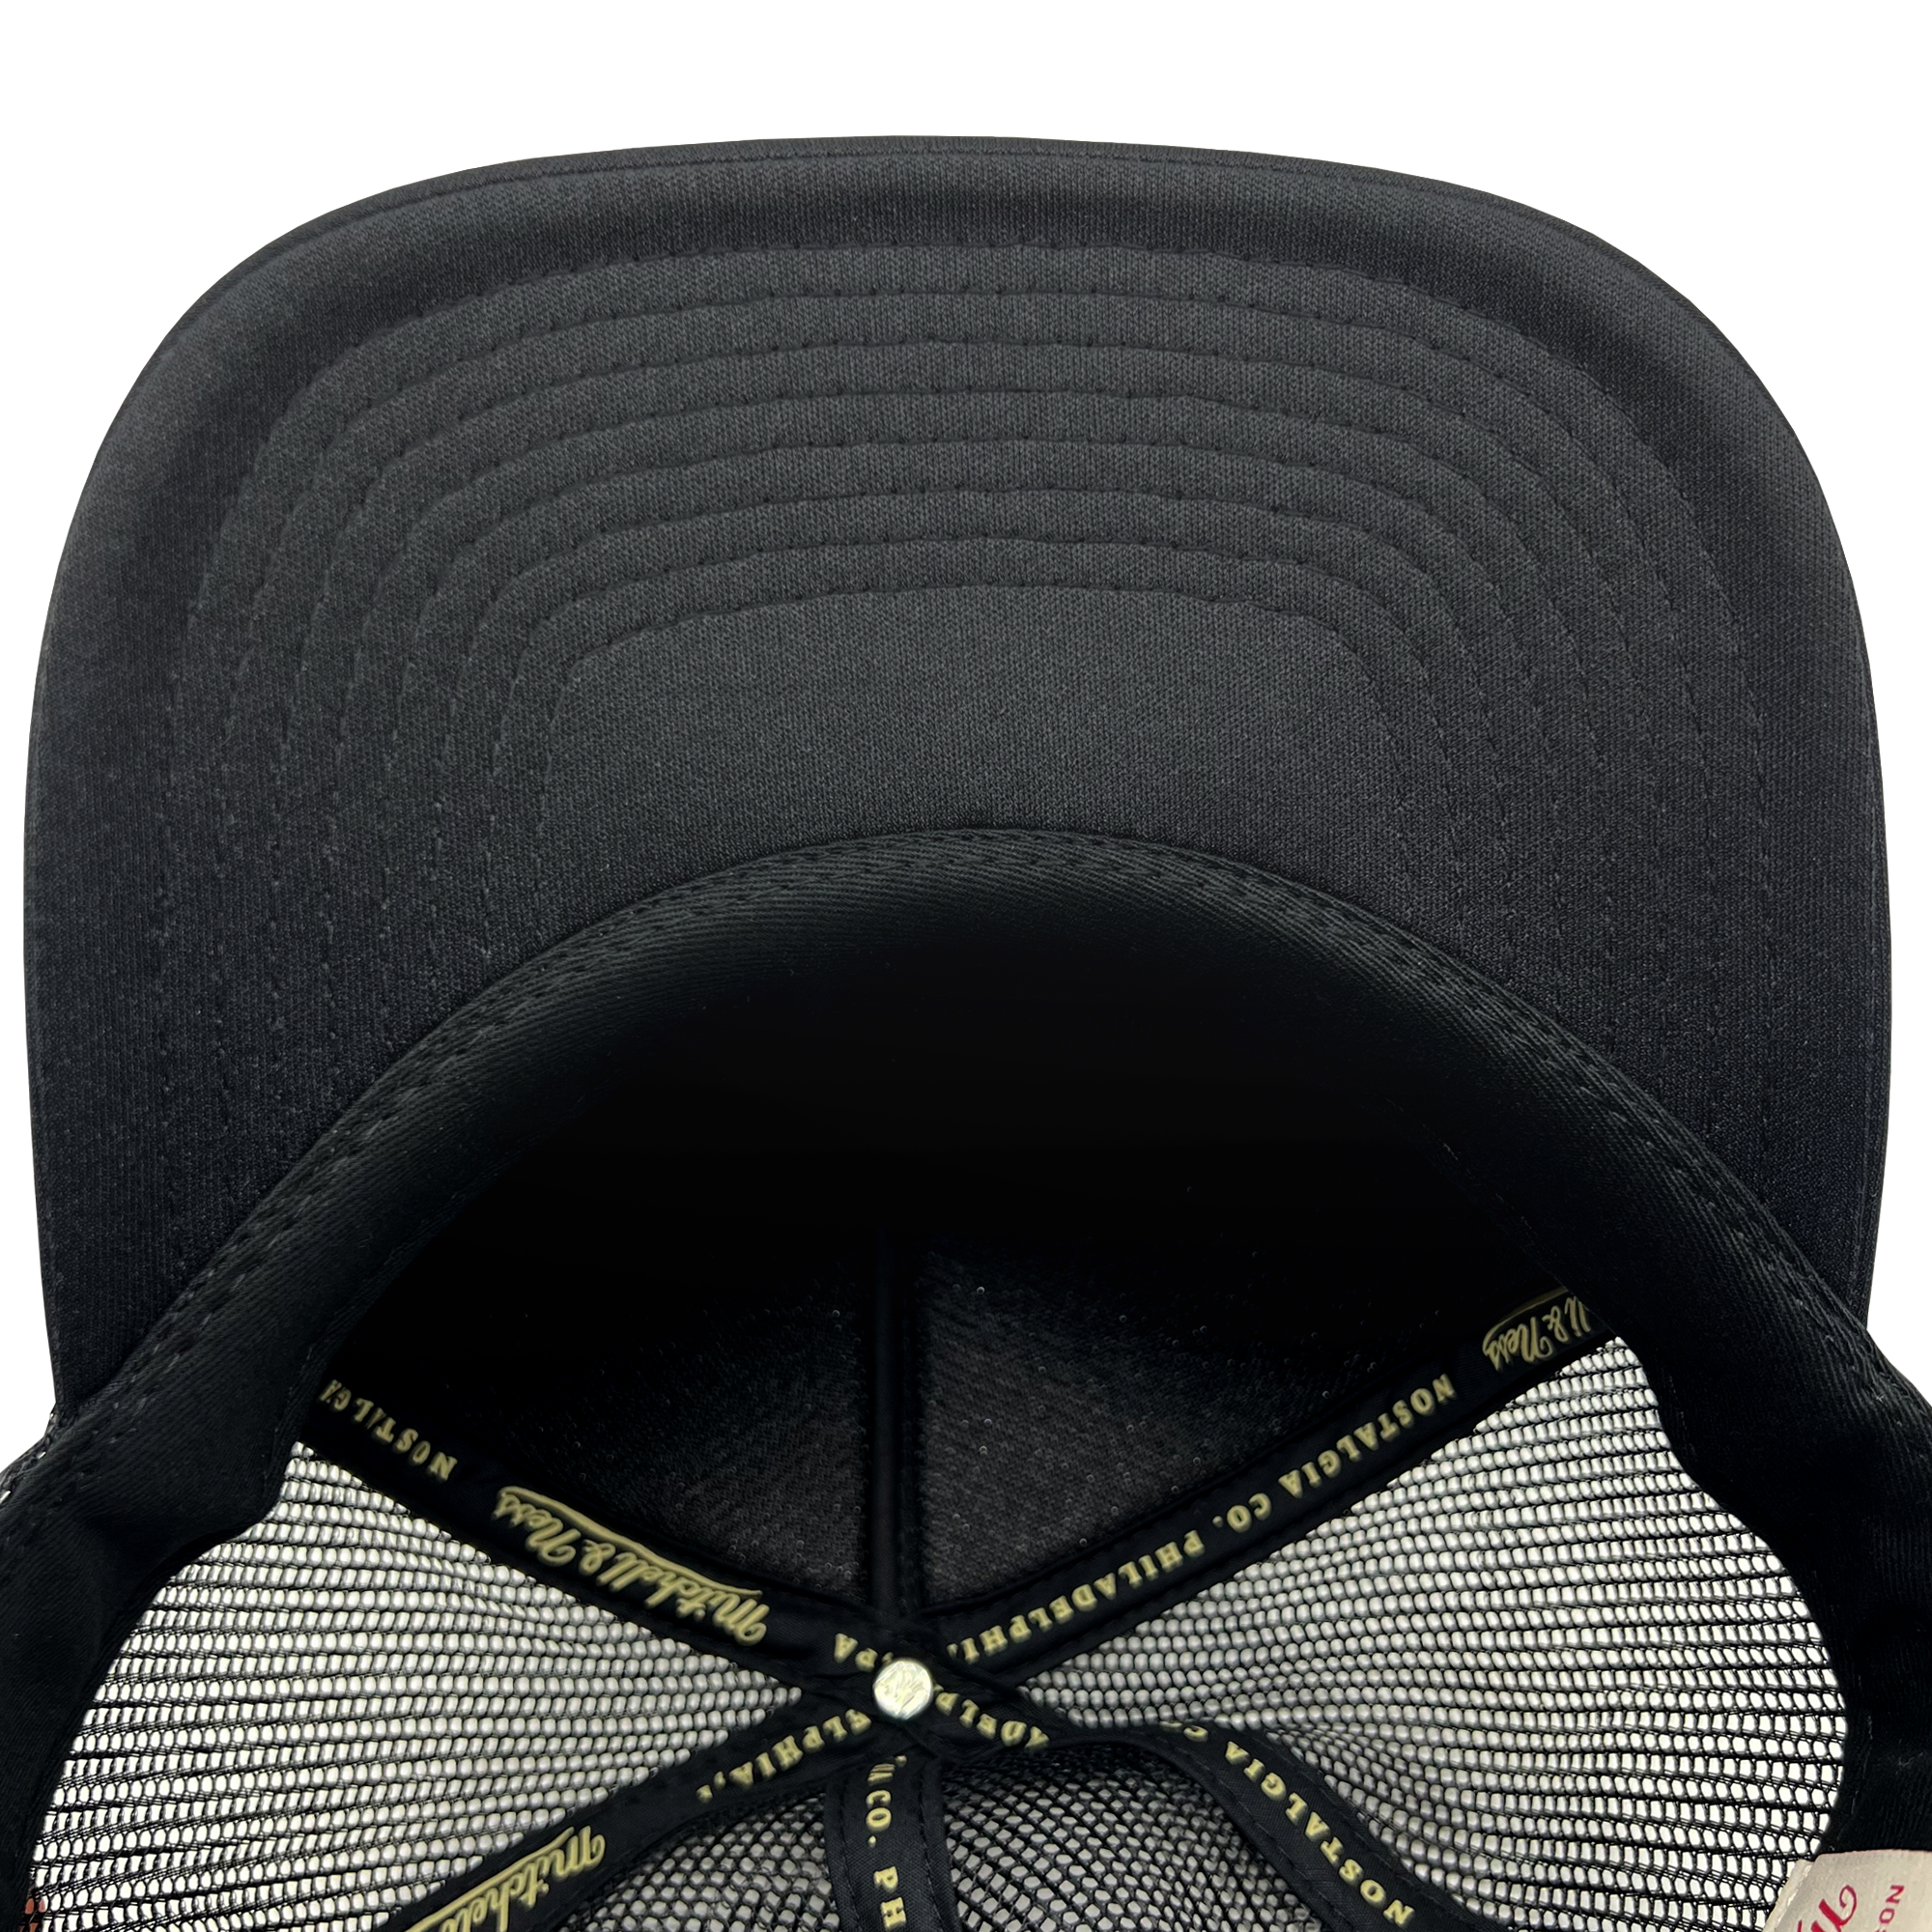 Detailed close-up of black undervisor and taping inside the crown of a black Mitchell & Ness truckers cap.